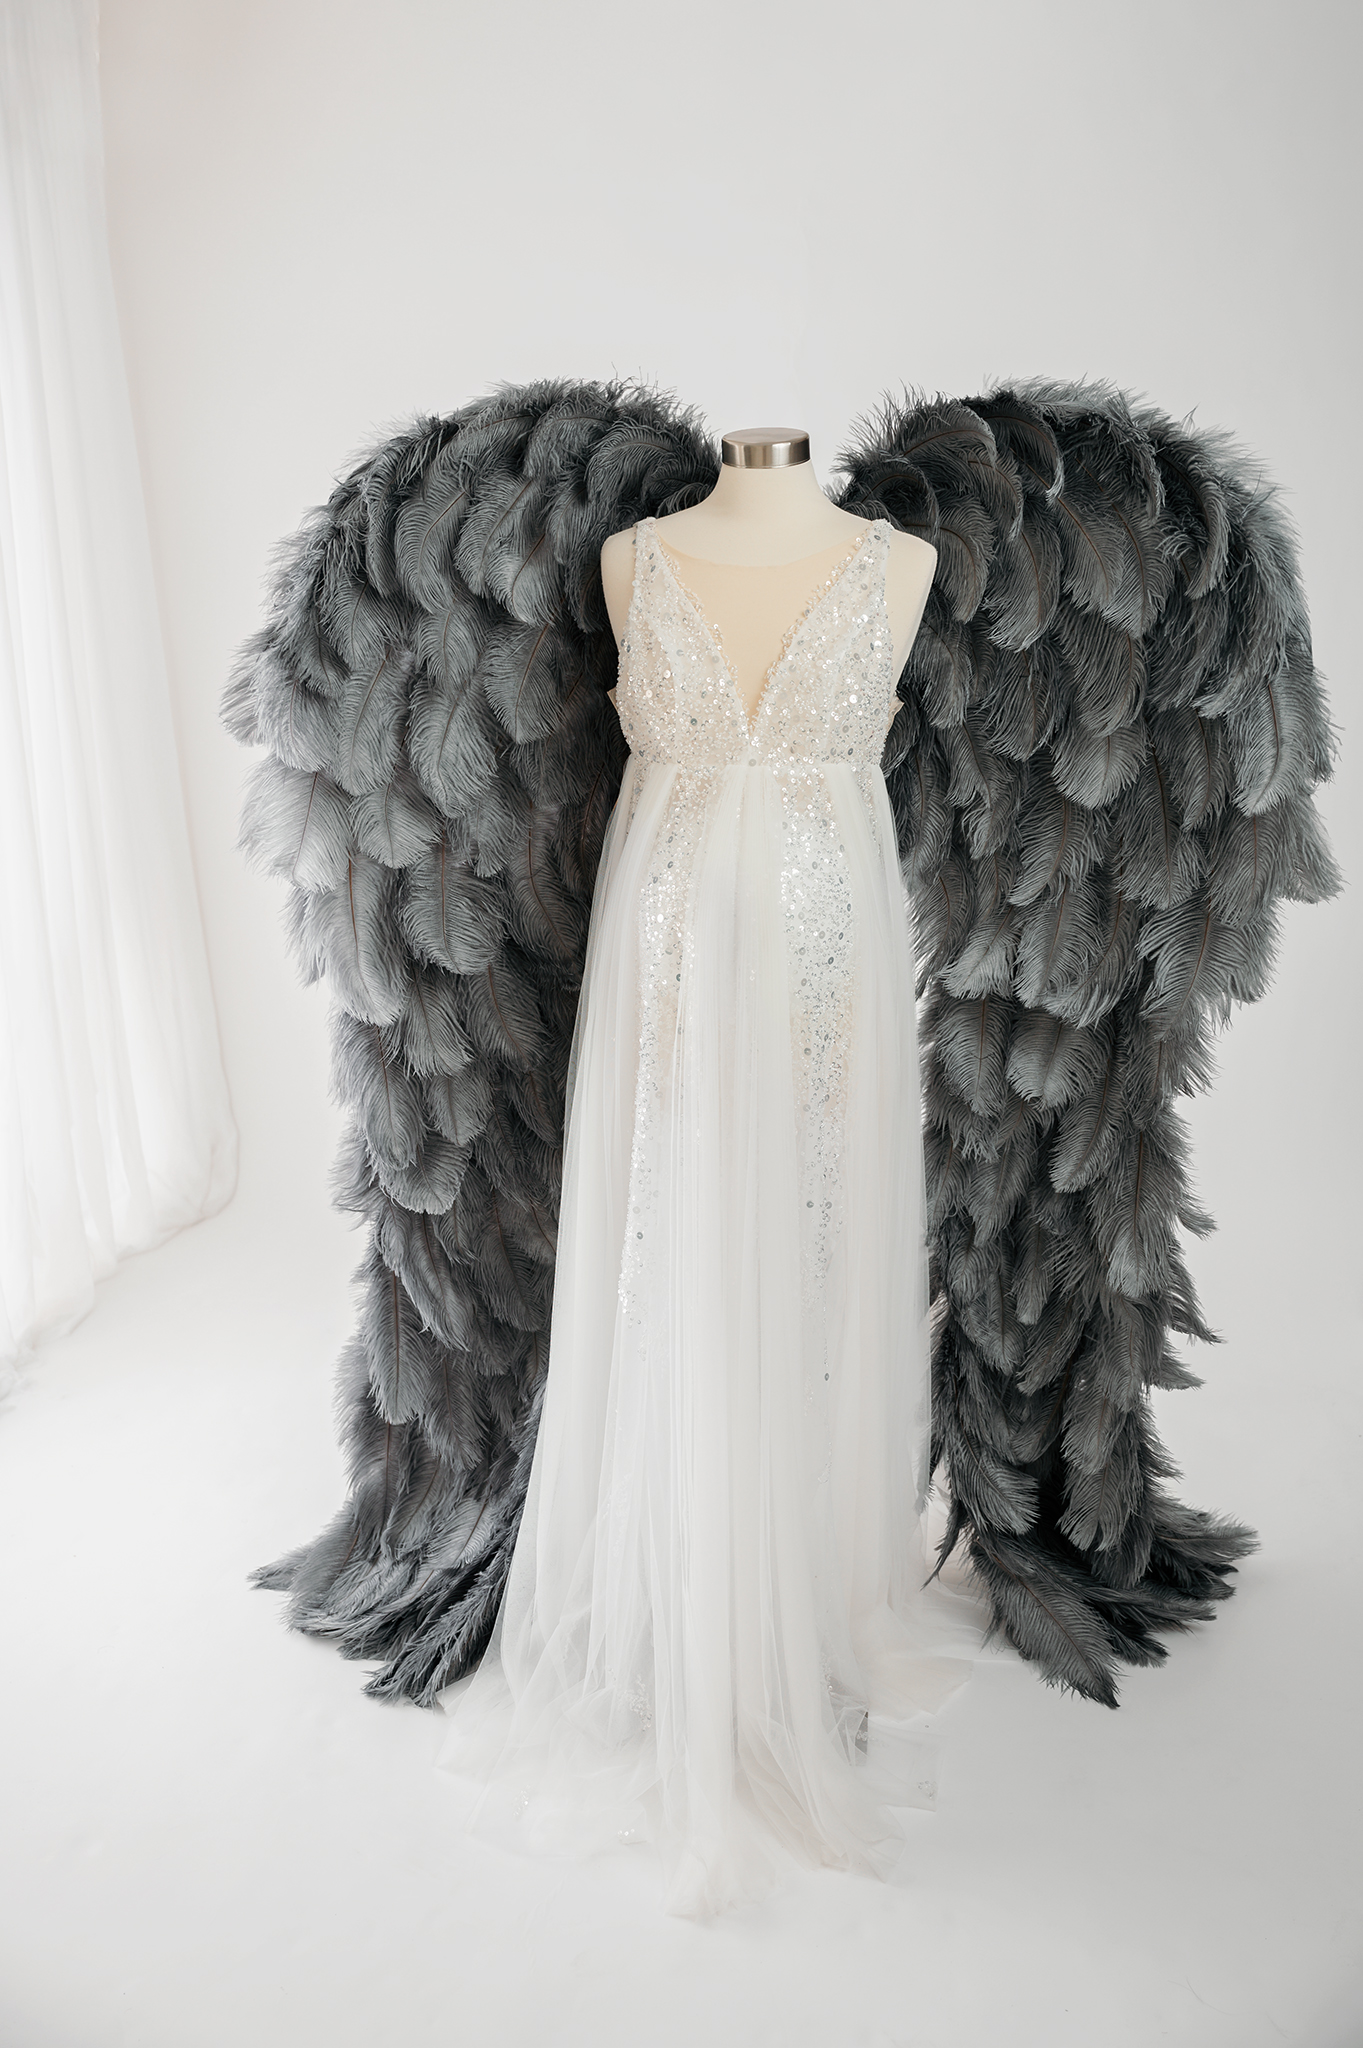 white pregnancy gown with angel wings for photoshoot | Elmira NY maternity photography studio